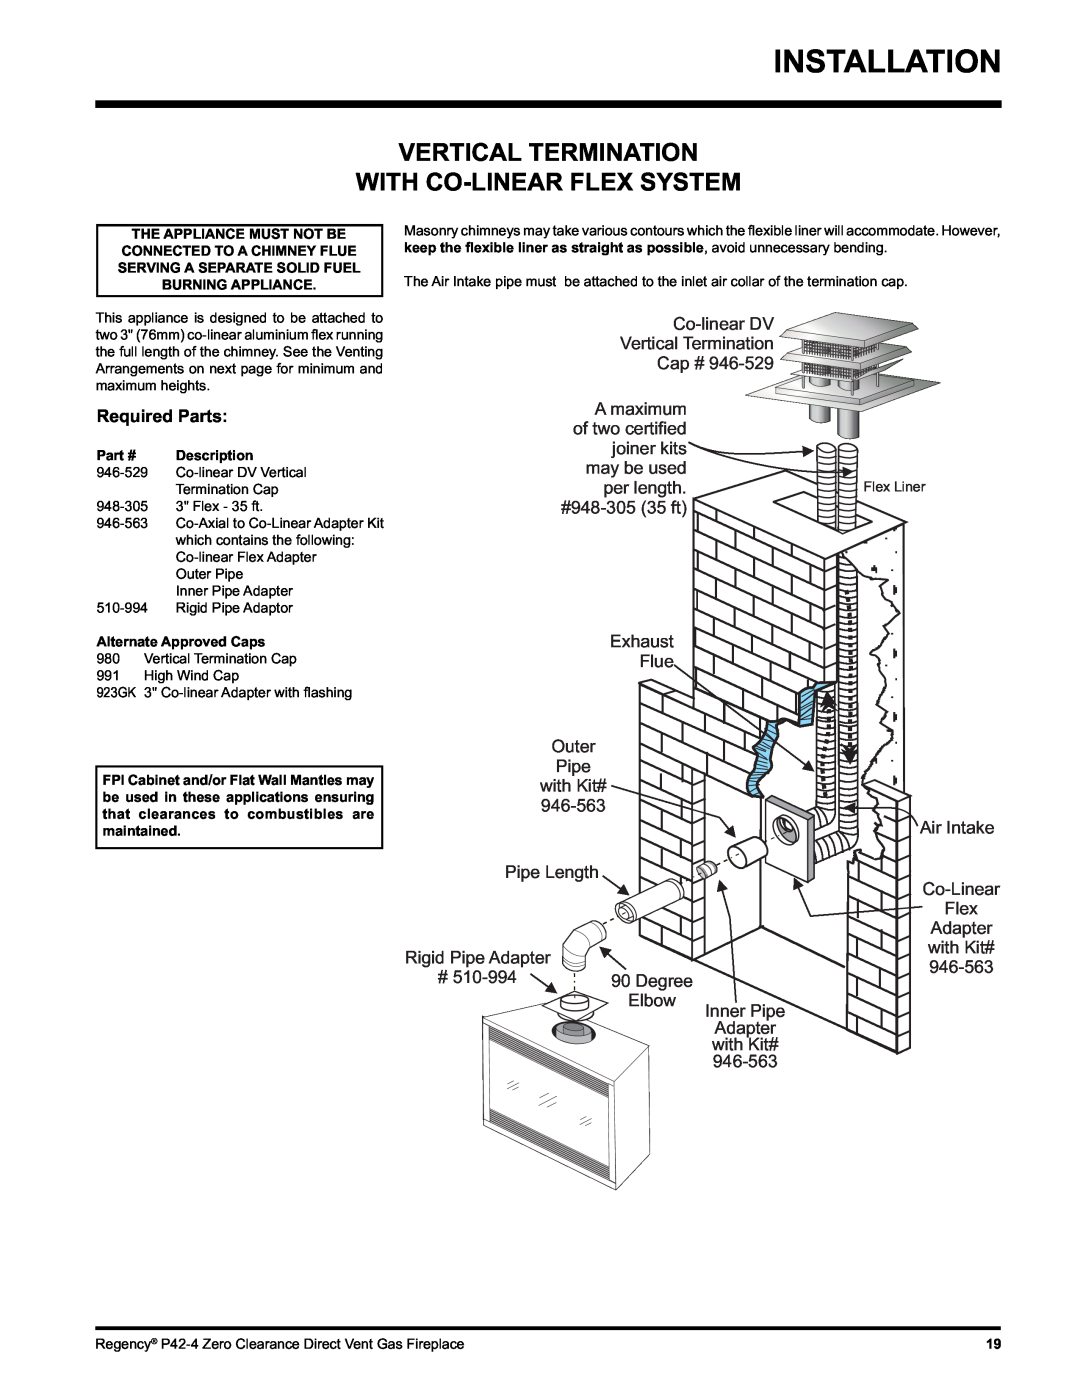 Regency P42-LP4, P42-NG4 installation manual Vertical Termination With Co-Linearflex System, Required Parts 